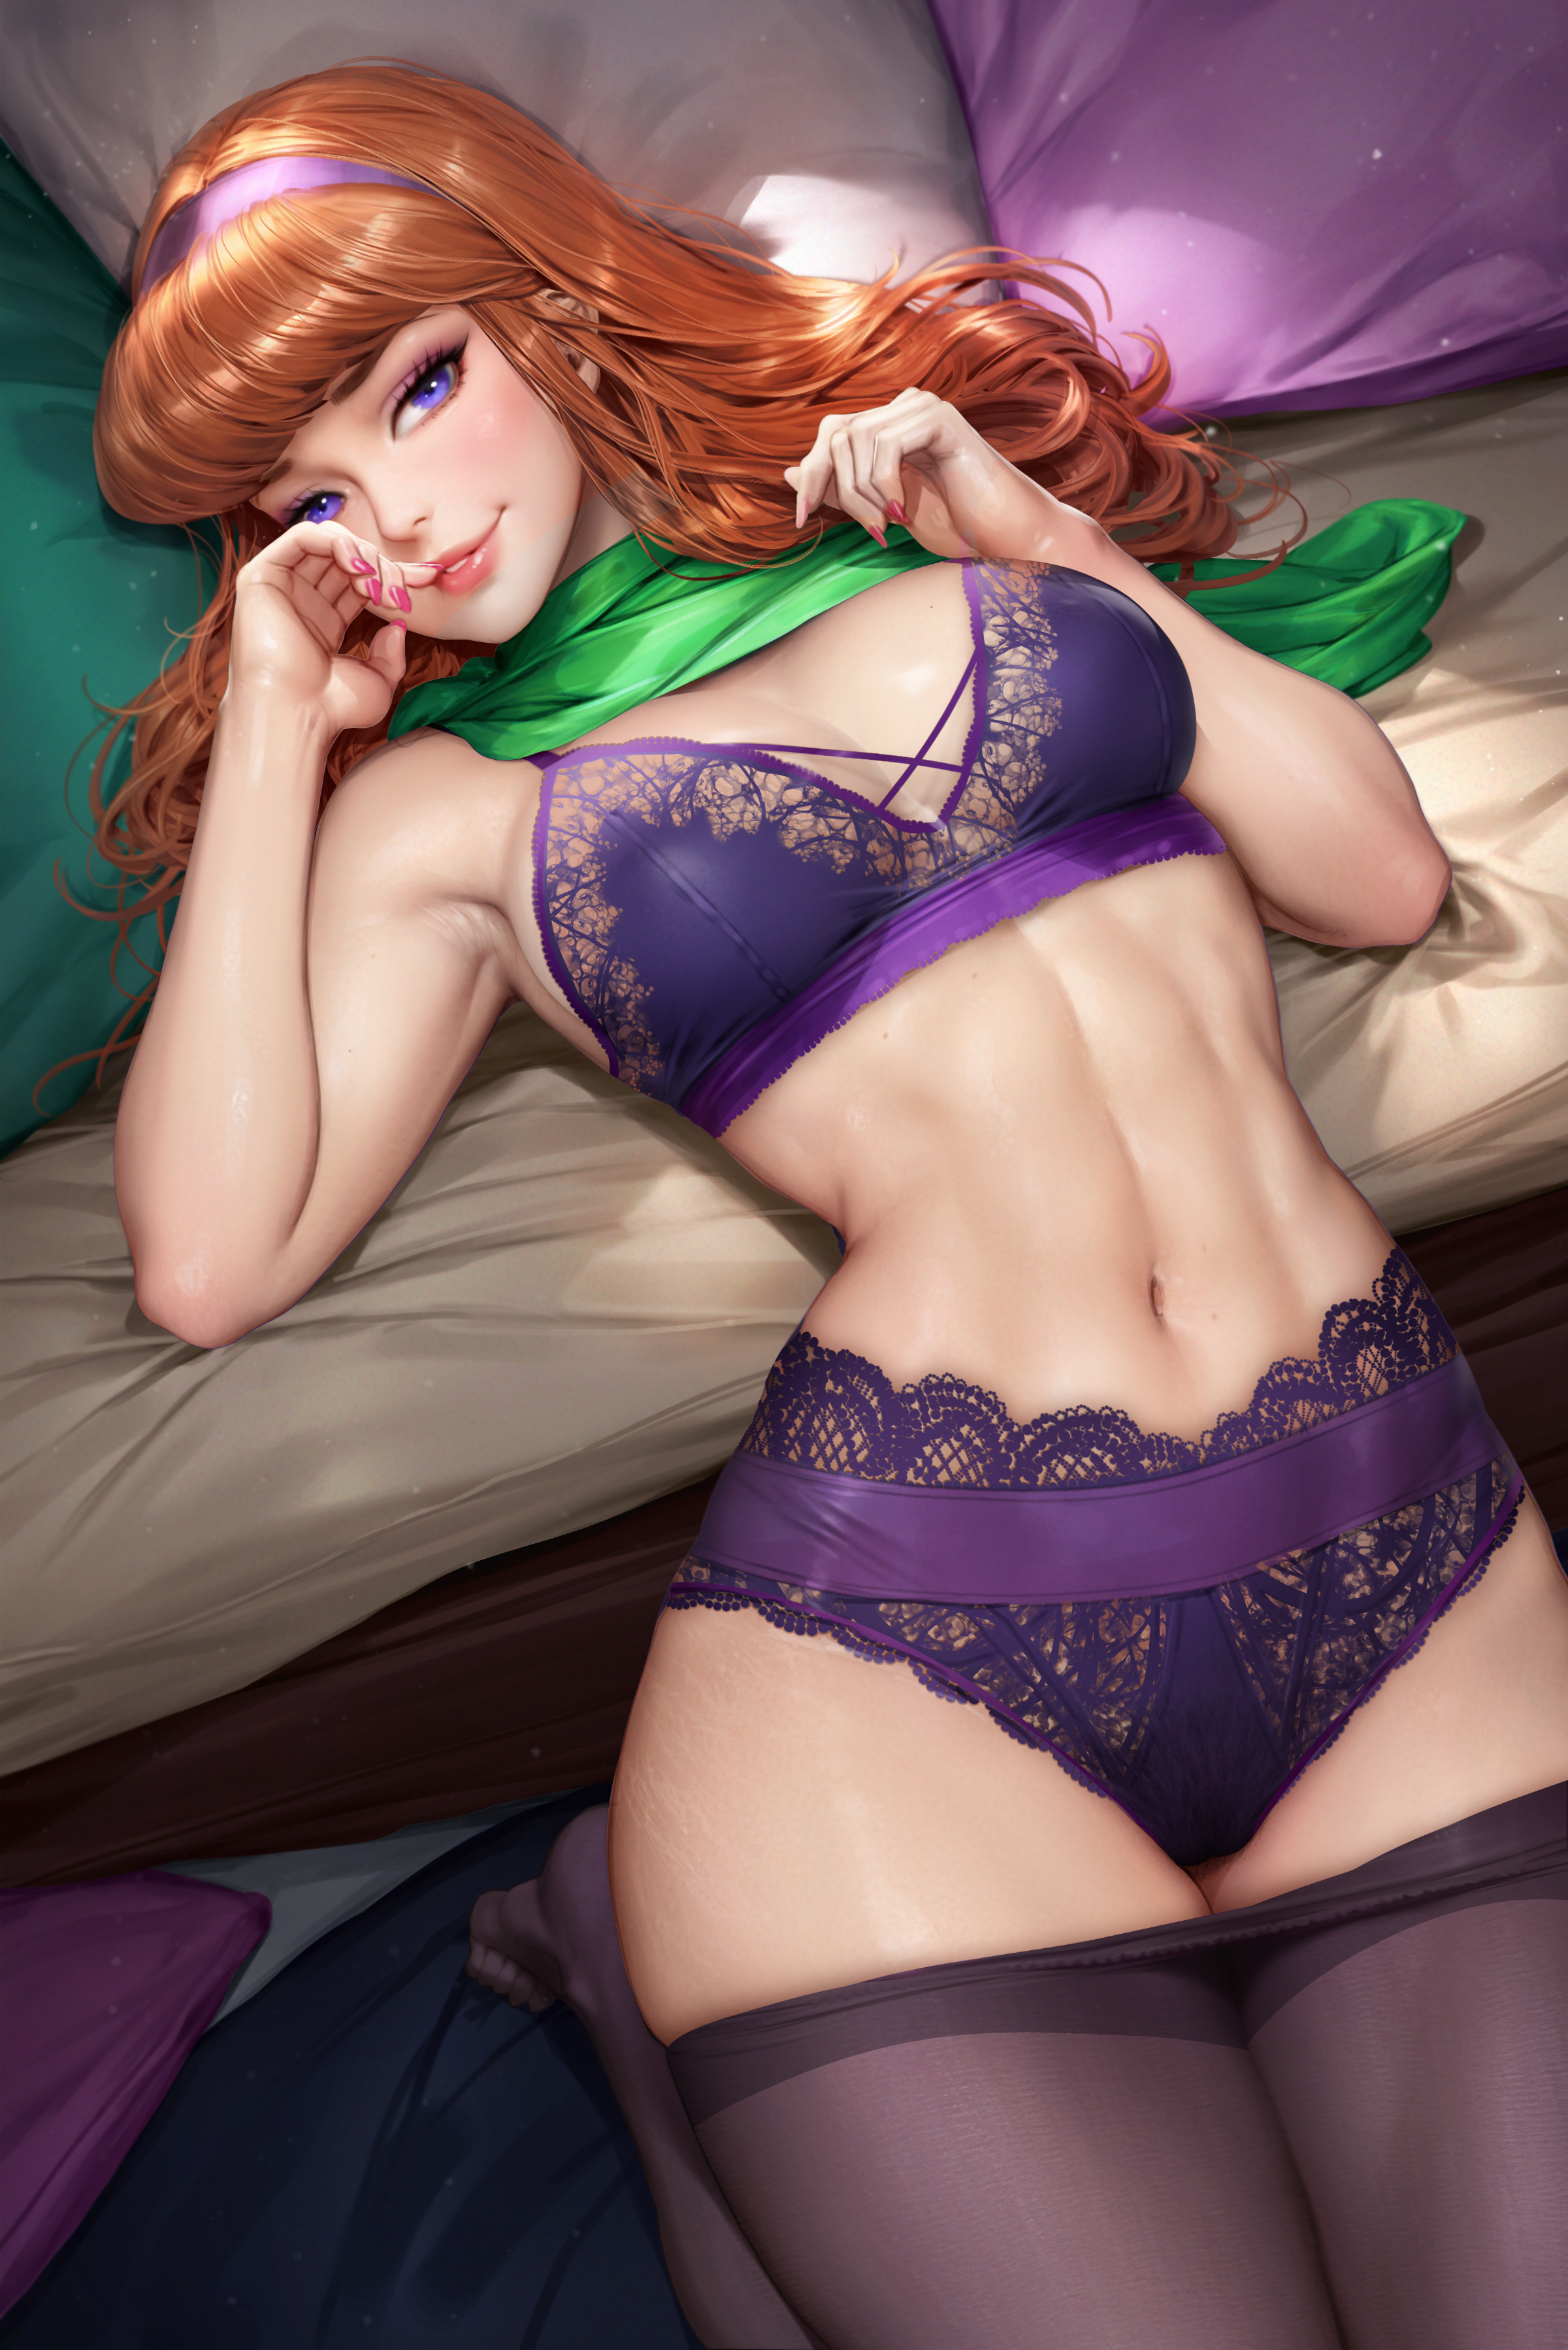 General 2400x3597 Daphne Blake Scooby-Doo fictional character redhead animated character 2D artwork drawing fan art NeoArtCorE (artist) black thigh-highs kneeling bent legs high angle thighs together indoors frontal view top view parted lips long hair sensual gaze armpits belly button purple lingerie